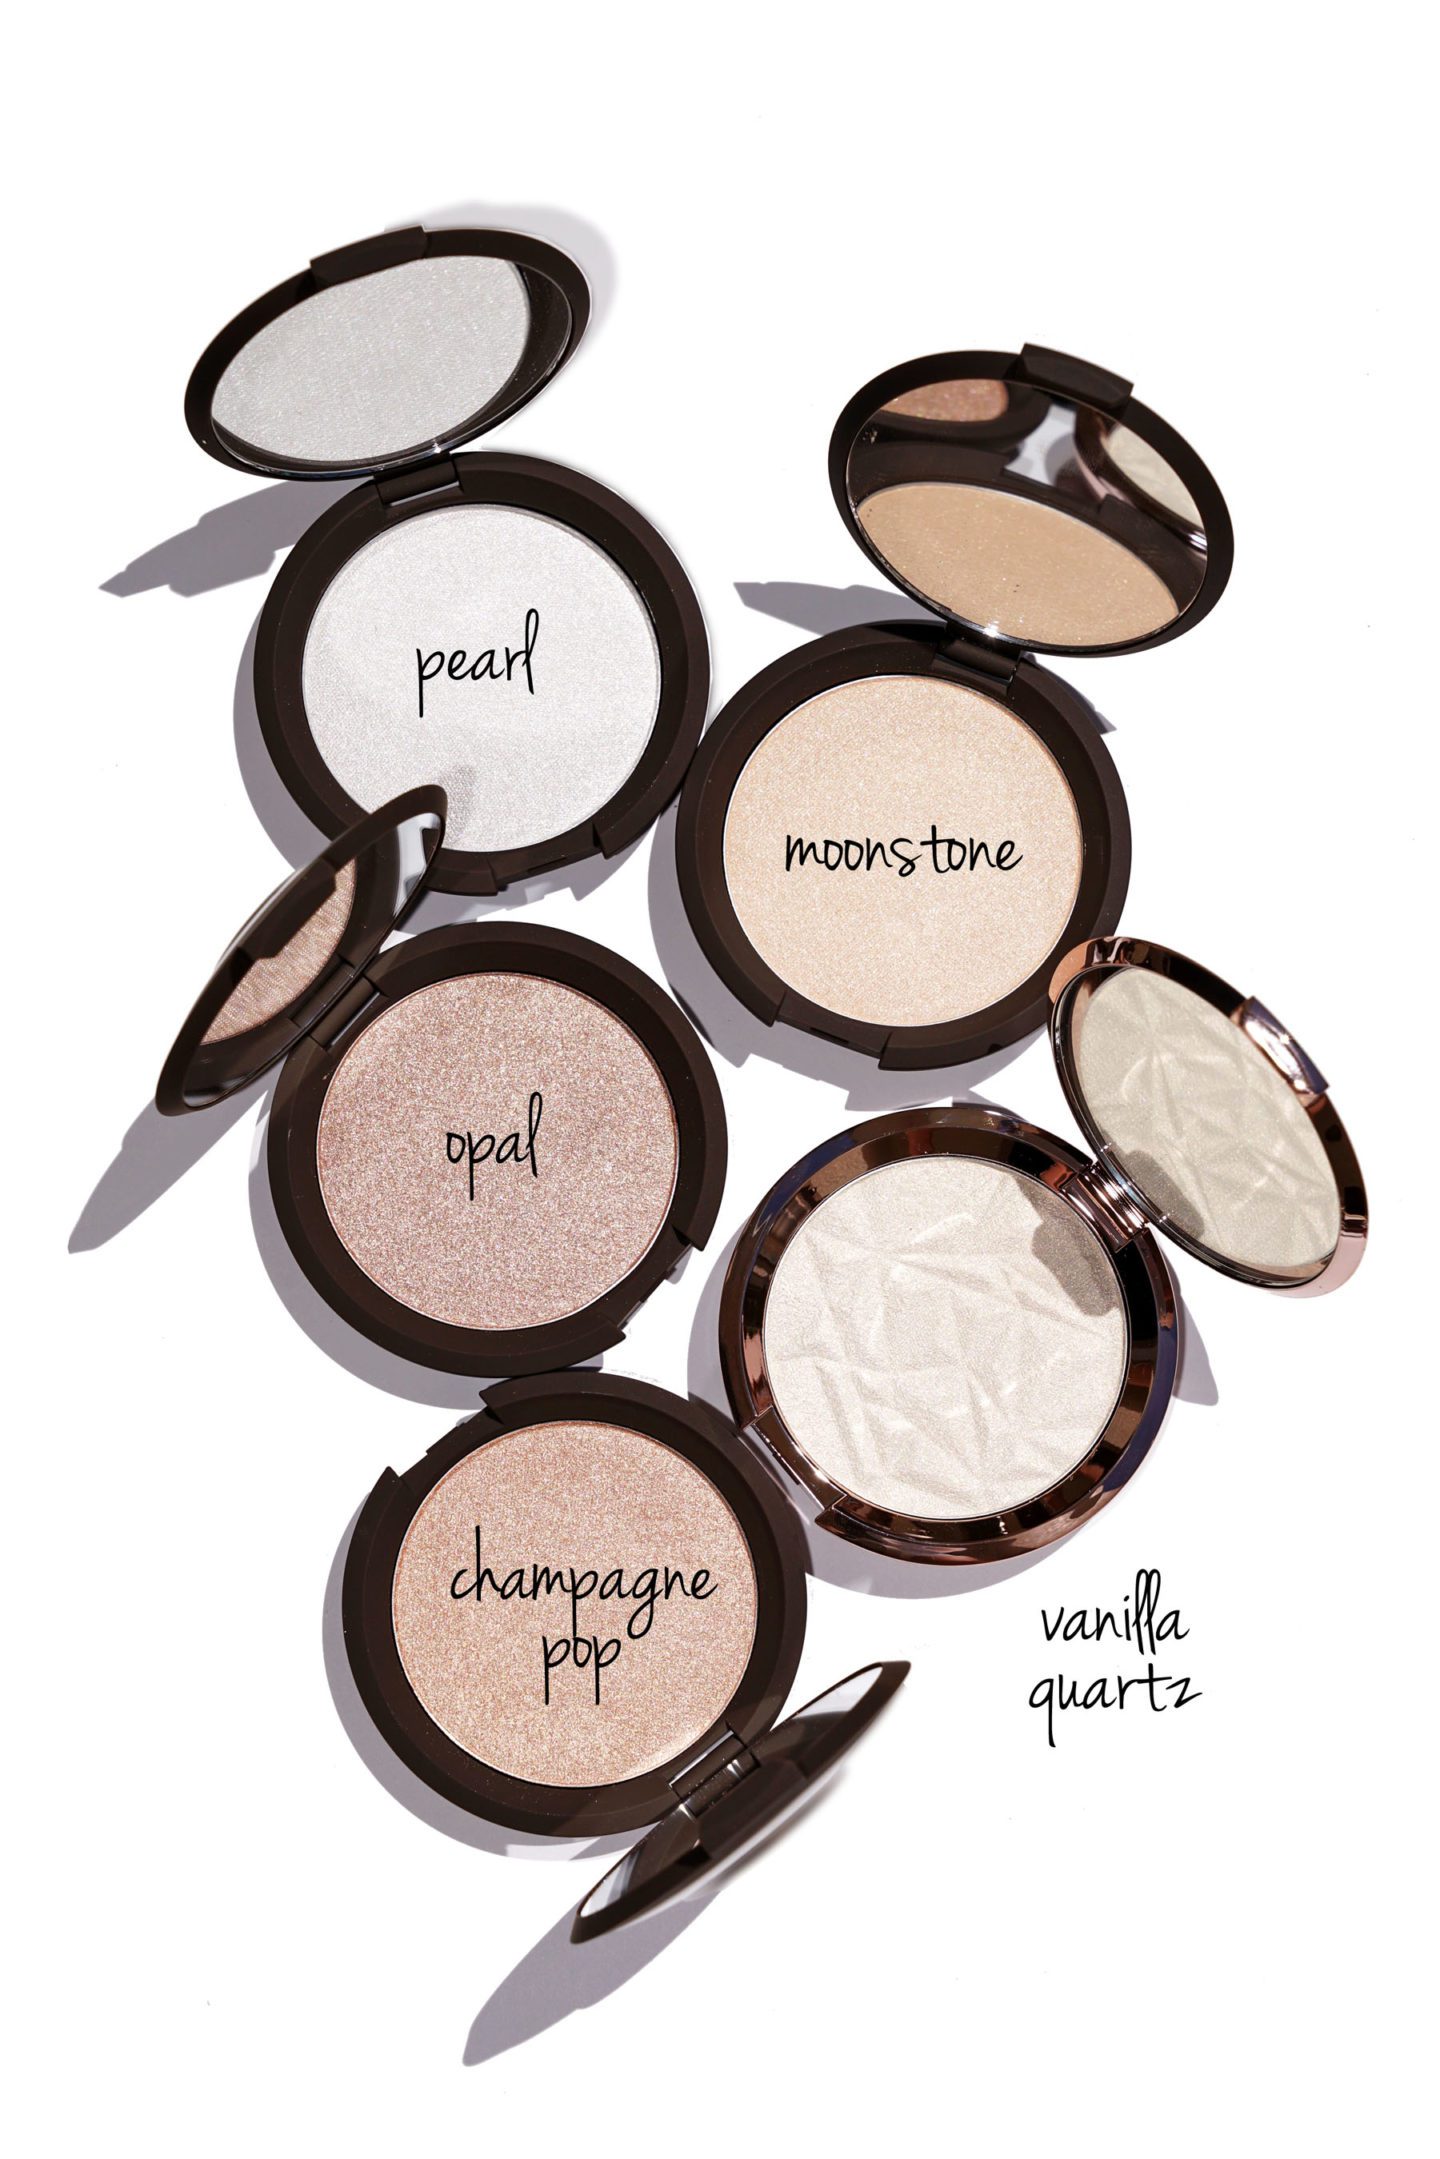 Becca Shimmering Skin Perfector Pressed Pearl, Moonstone, Vanilla Quartz, Champagne Pop and Opal review + swatches